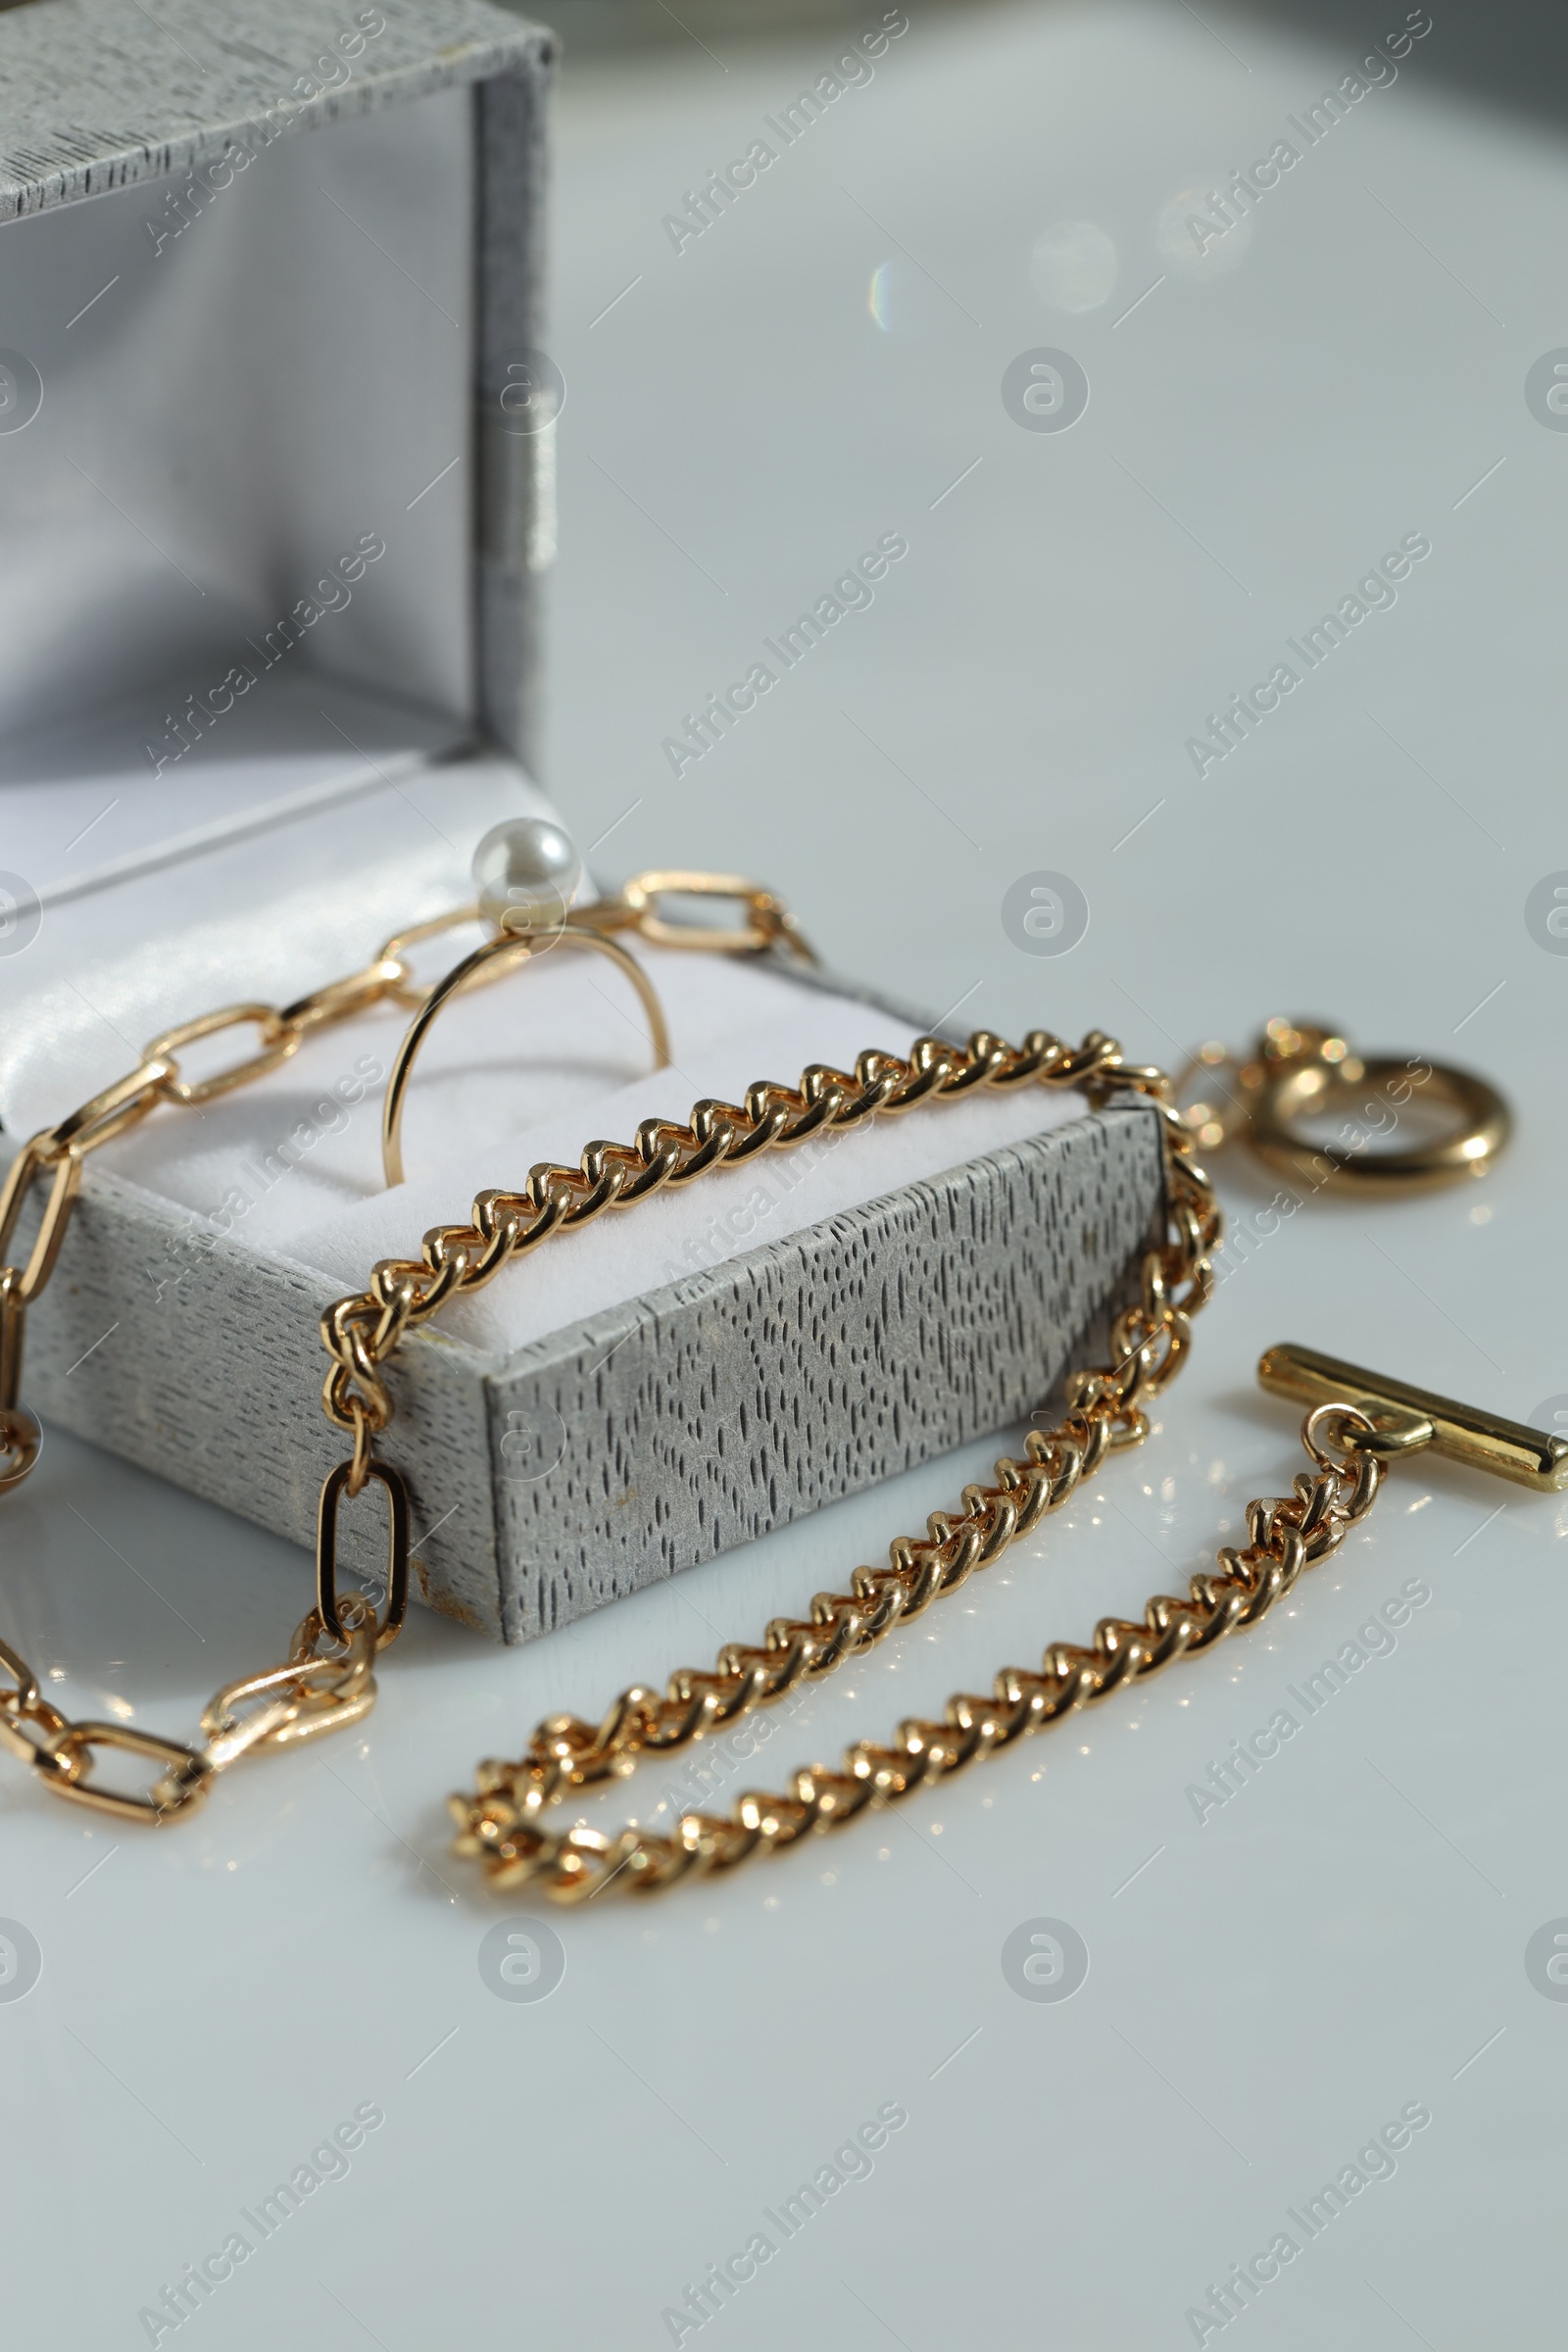 Photo of Metal chain and jewelry box with ring on white table